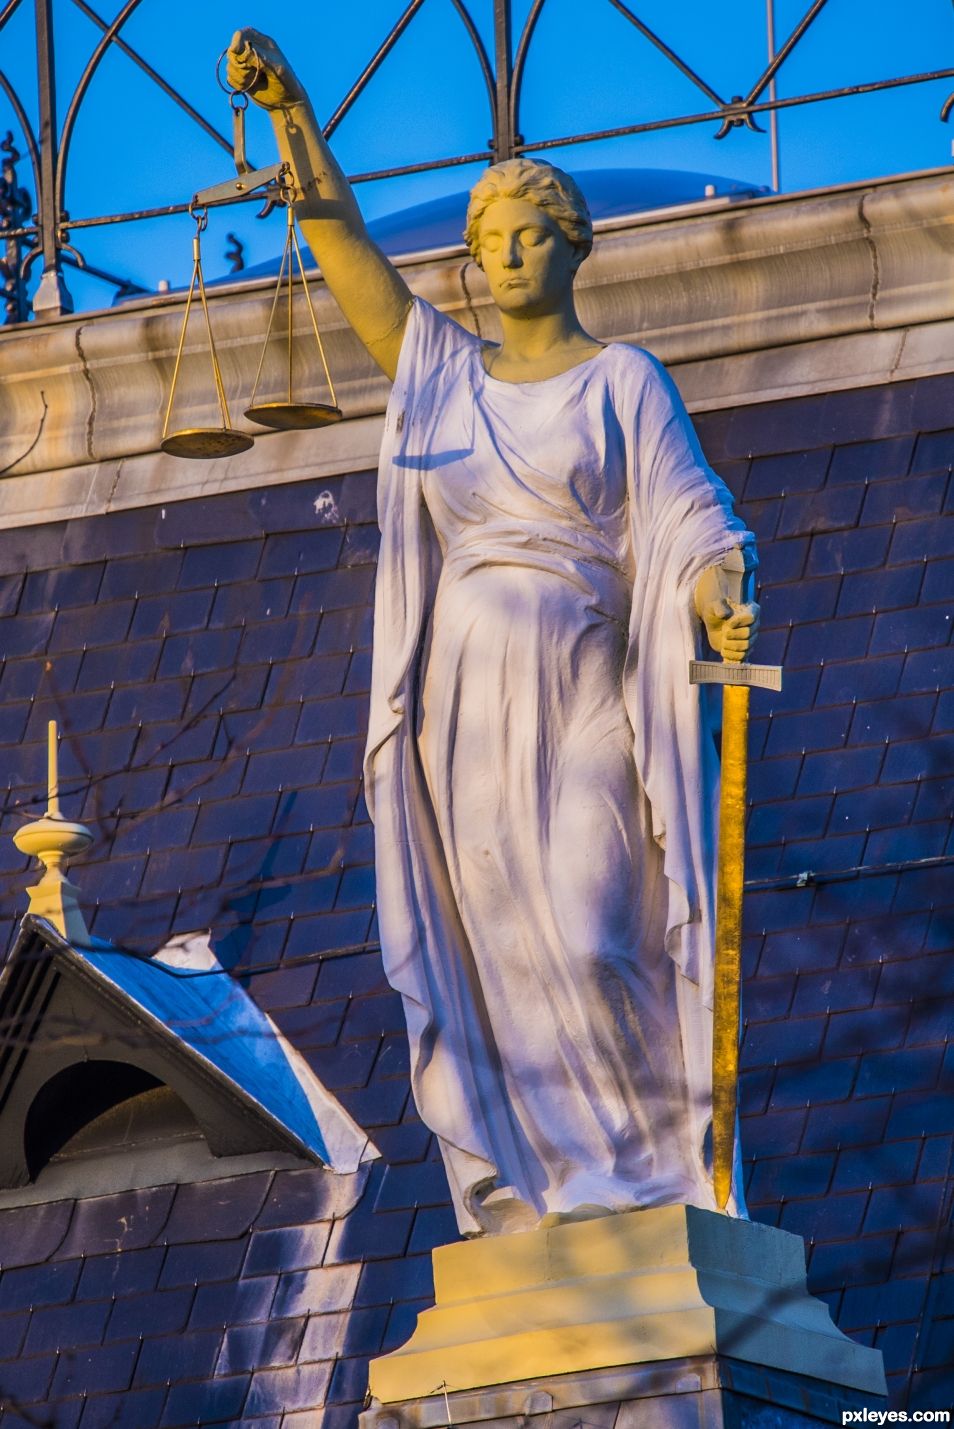 Creation of Lady justice blindfolded no more: Step 1